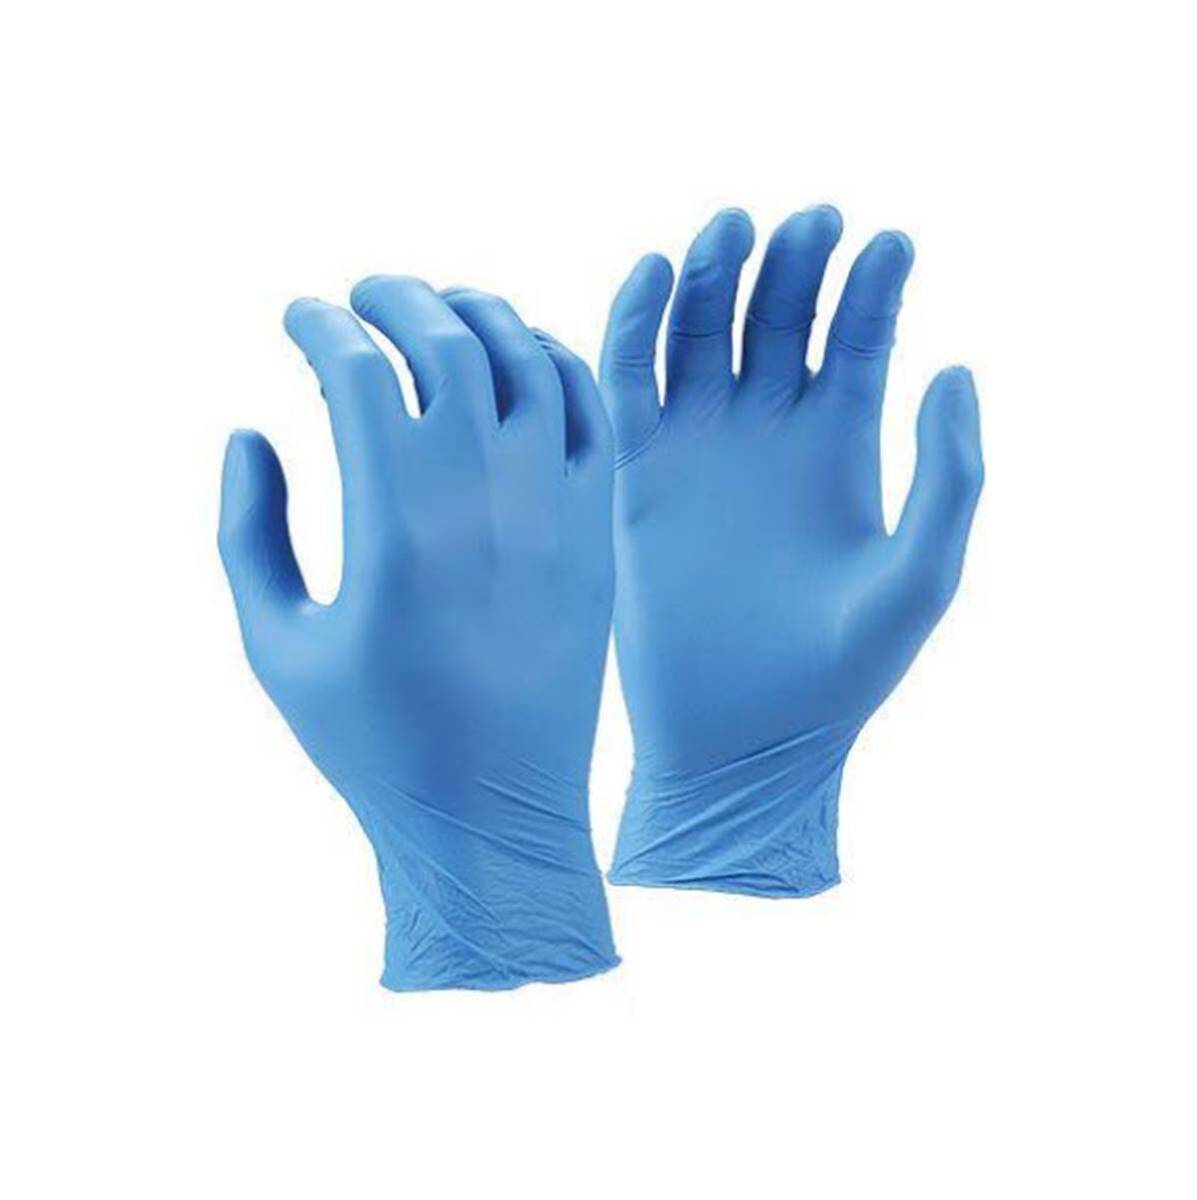 SafePath Large Blue Light Duty 4 mil Nitrile Powder-Free Disposable Exam Gloves (100 Gloves Per Box) (Limited quantities availab